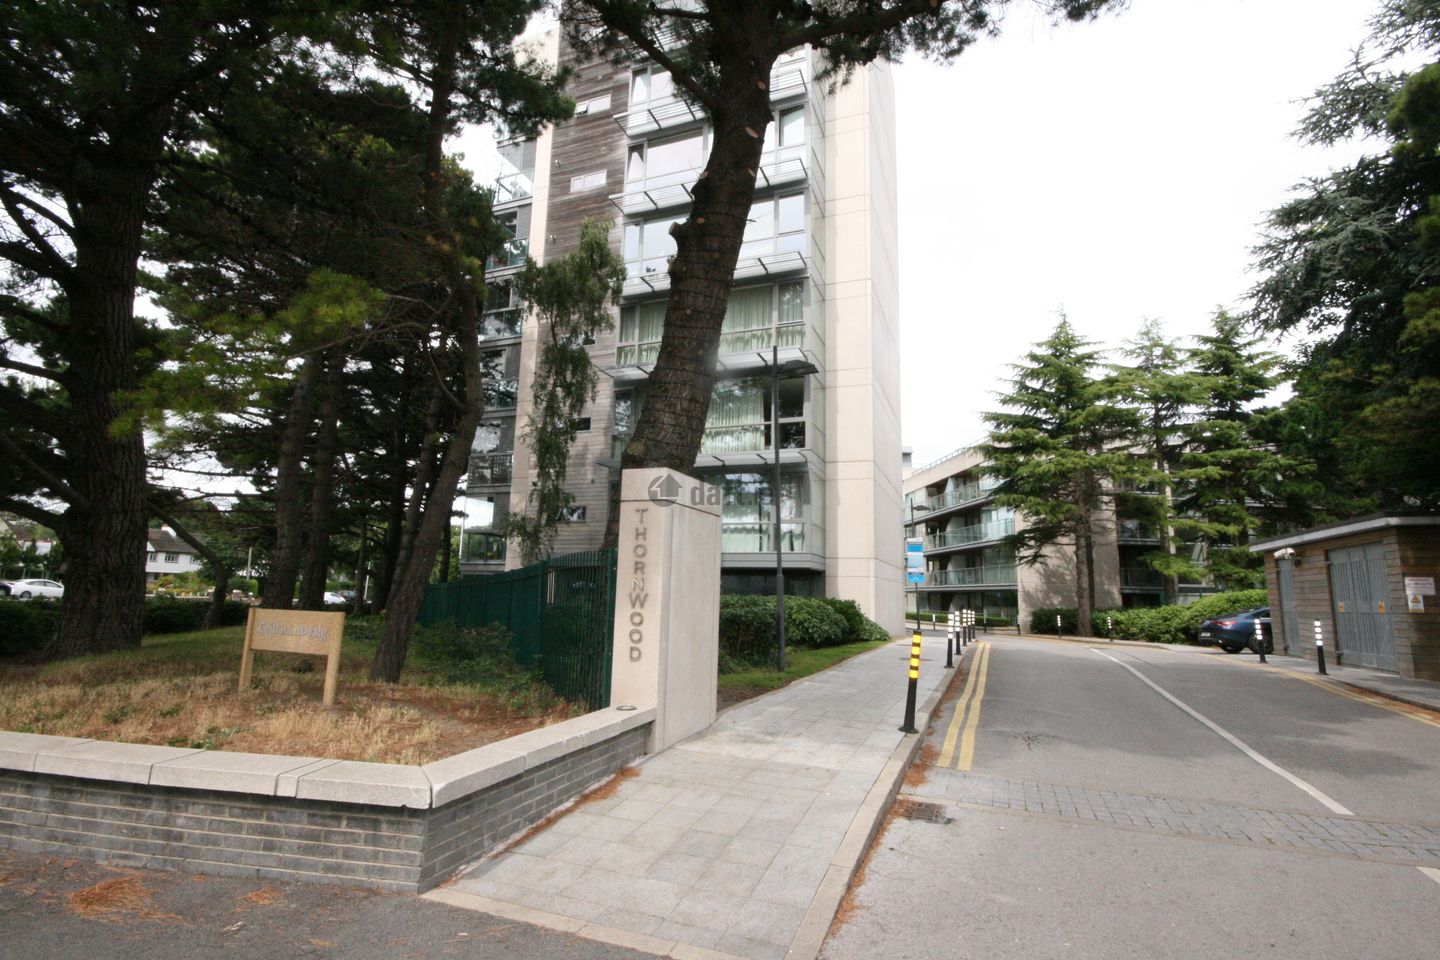 Apartment 15, The Heron, Booterstown, Co. Dublin